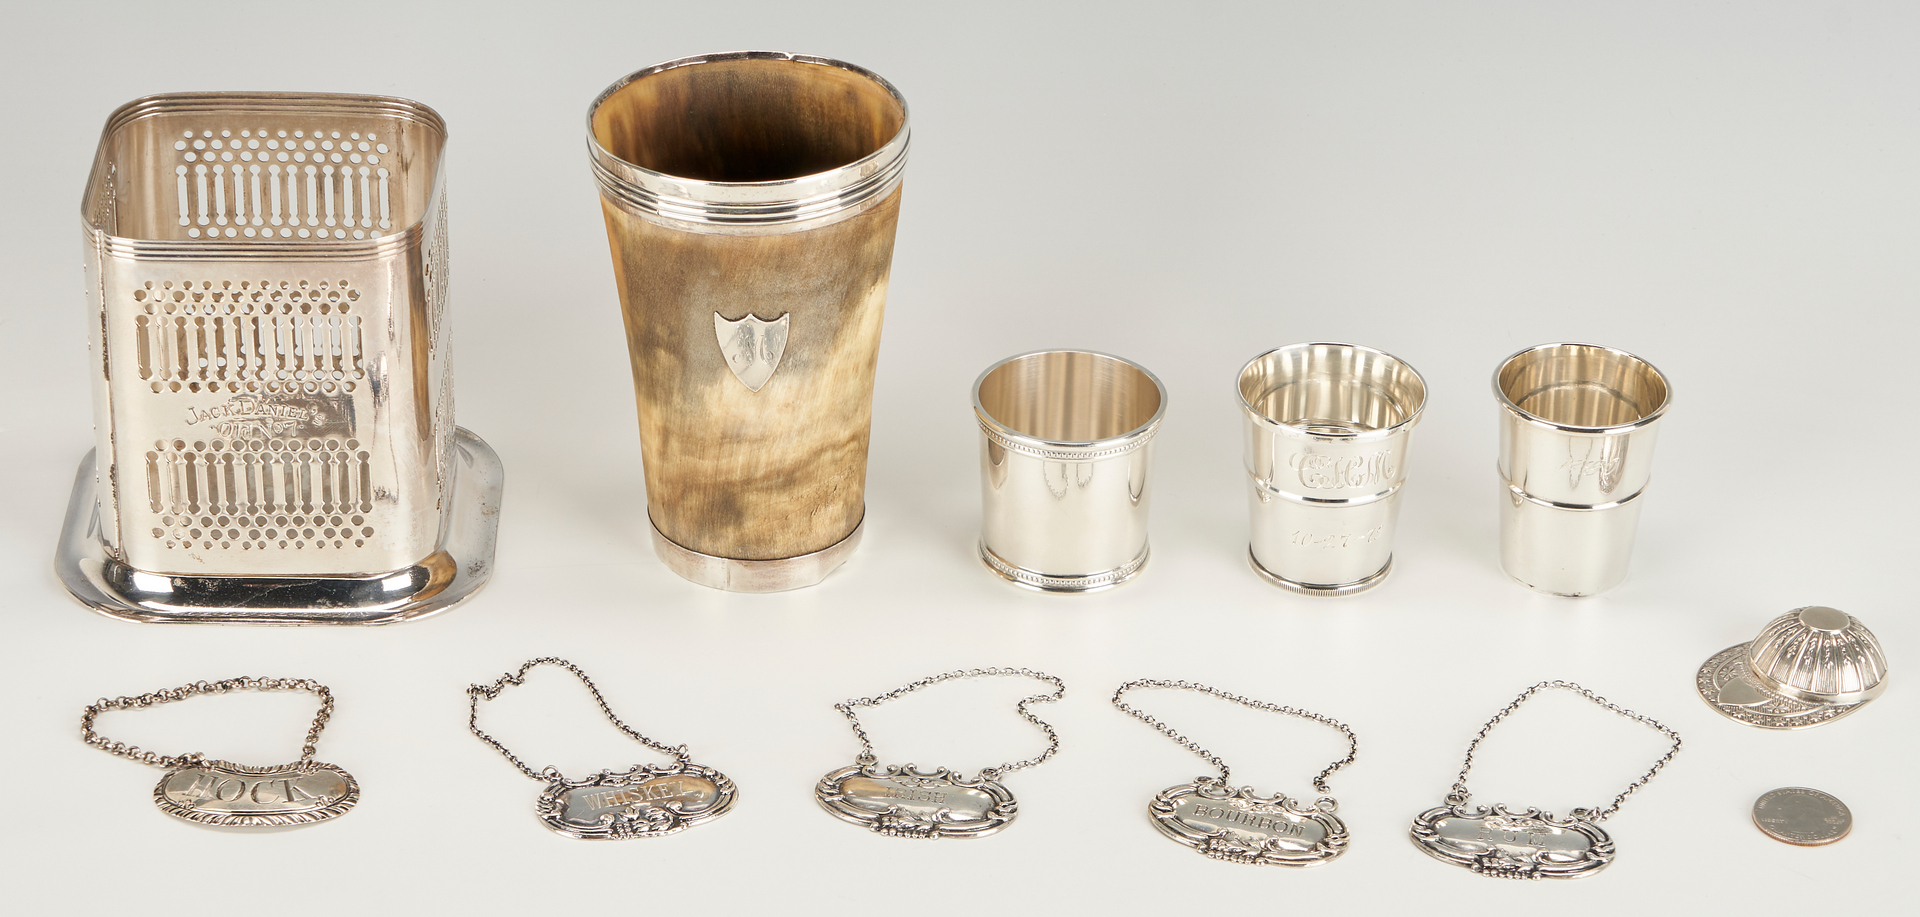 Lot 1237: 11 Silver Barware Items, incl. KY Scearce Cup